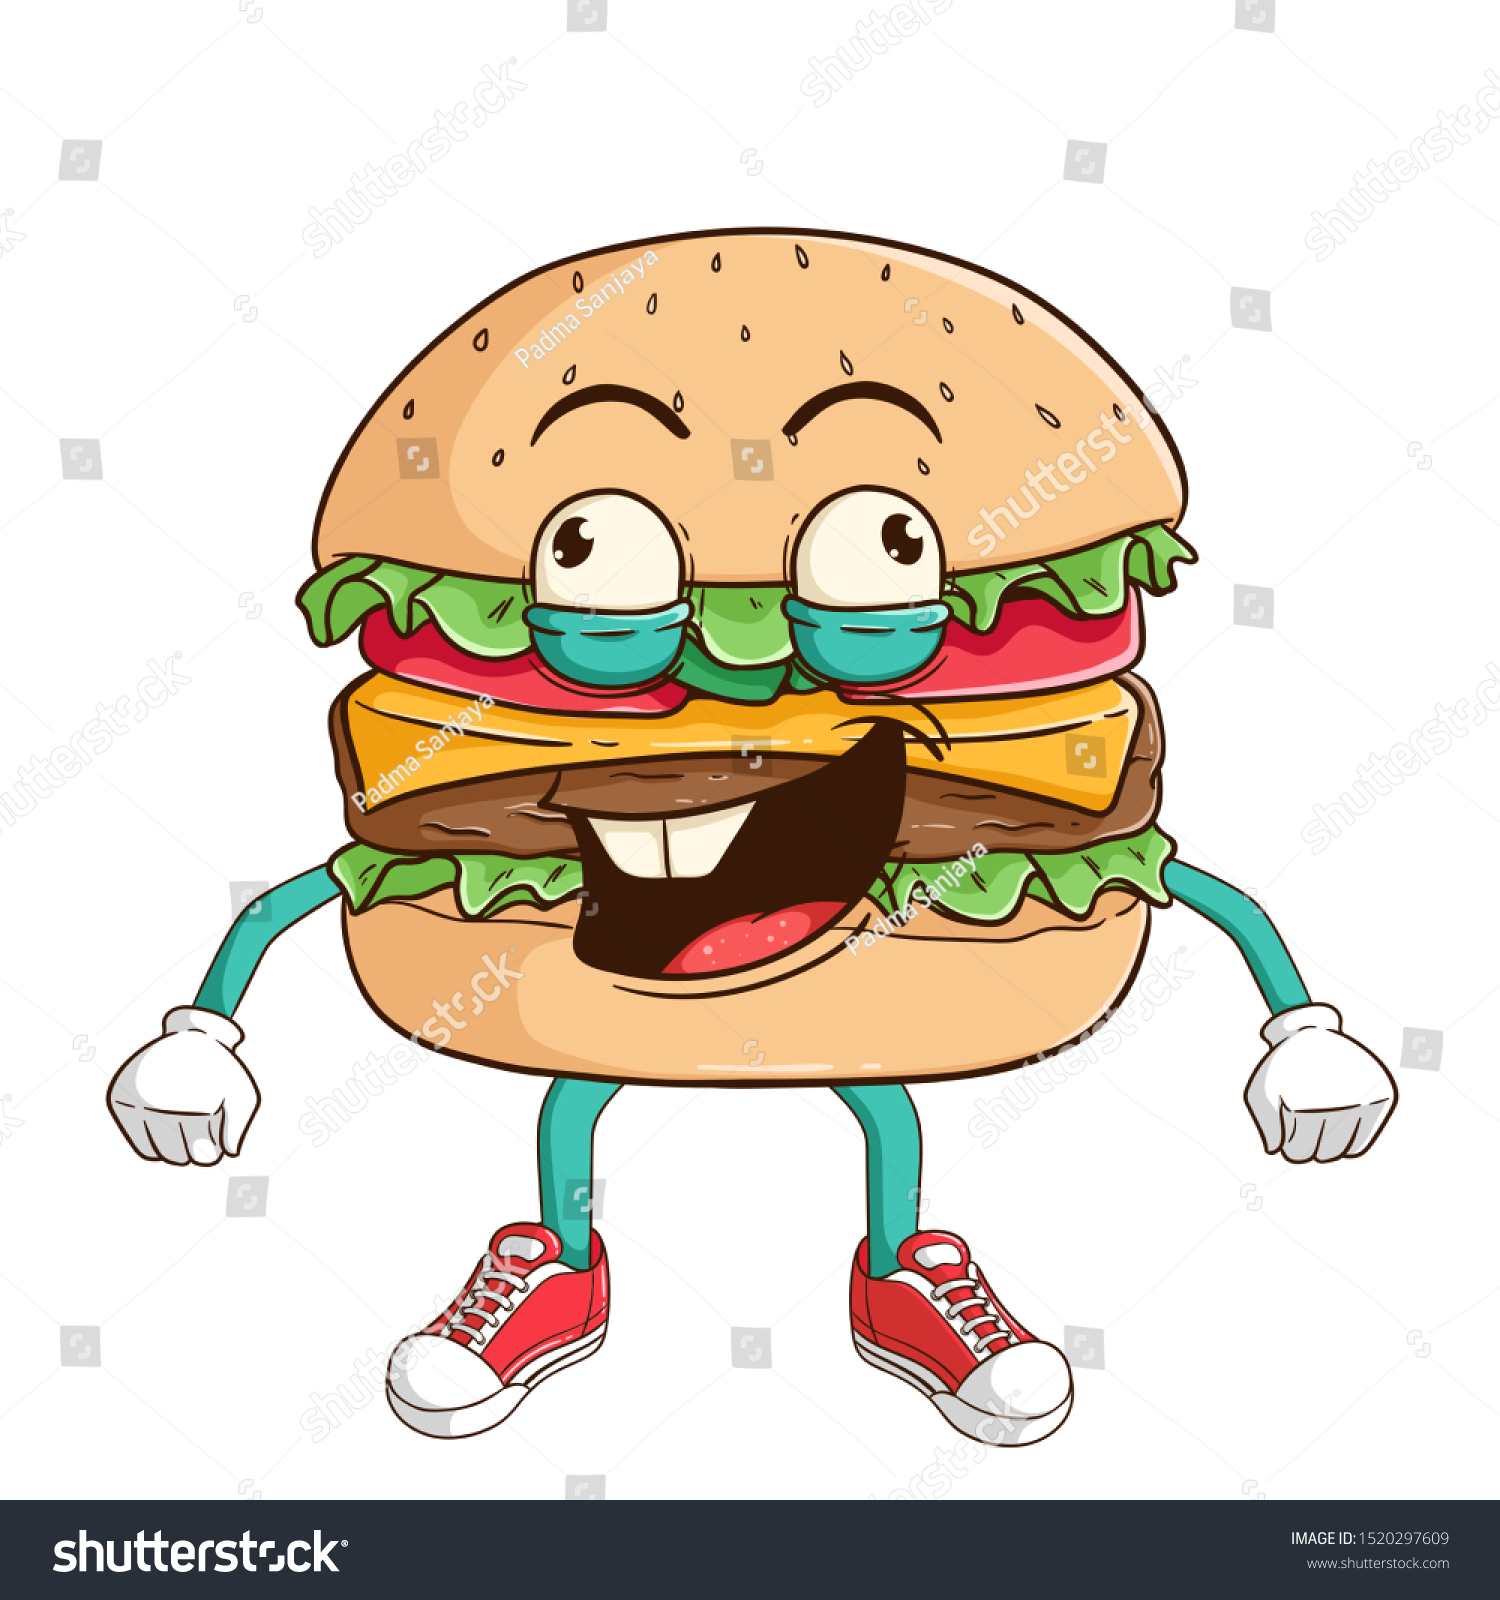 stock-vector-burger-cartoon-character-with-funny-stupid-or-crazy-expression-1520297609.jpg